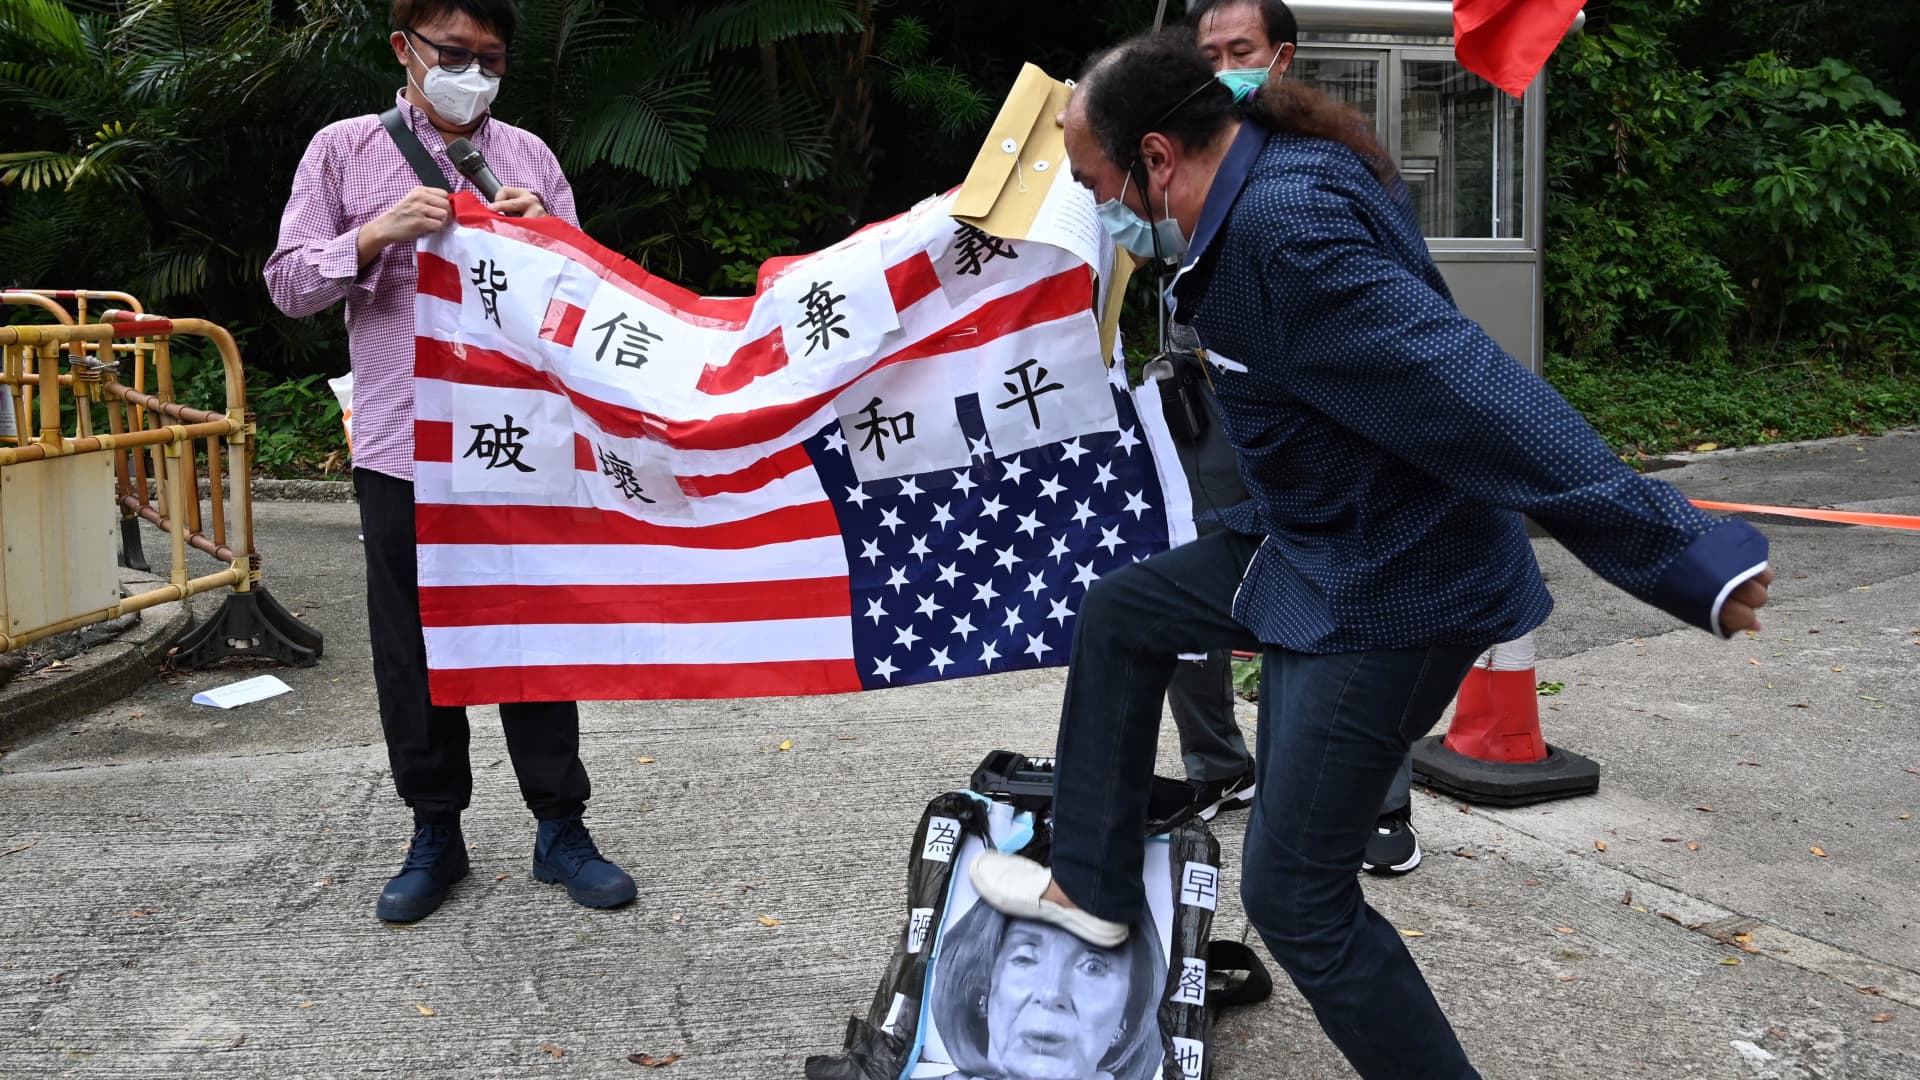 Pelosi's trip to Taiwan is like 'pouring salt in an open wound for China', Stephen Roach says